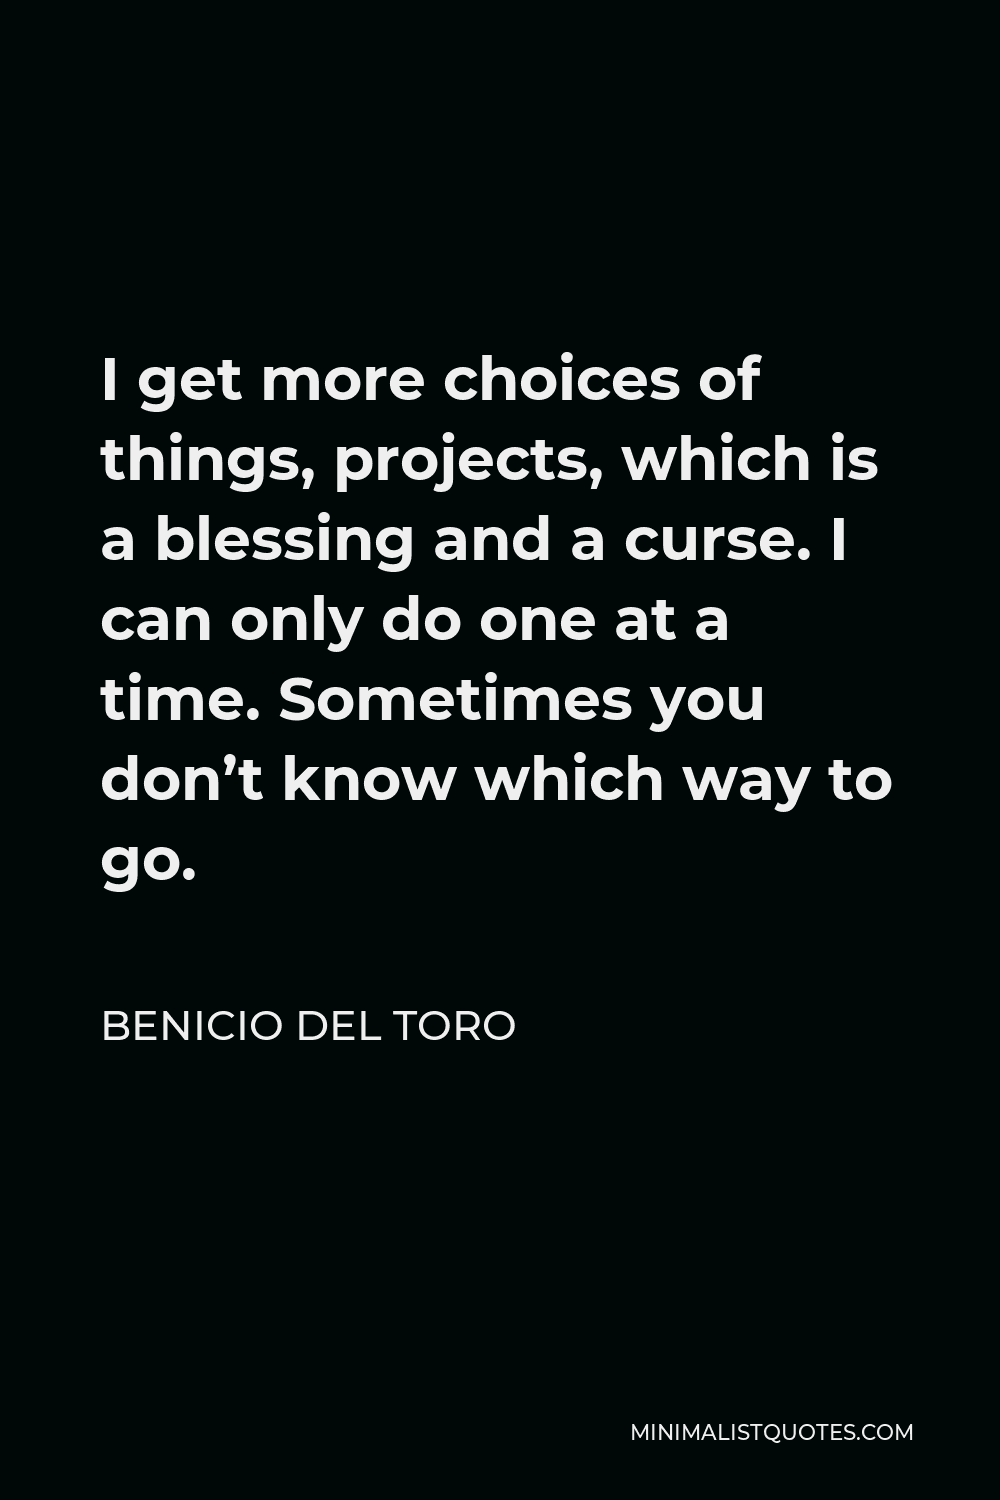 Benicio Del Toro Quote - I get more choices of things, projects, which is a blessing and a curse. I can only do one at a time. Sometimes you don’t know which way to go.